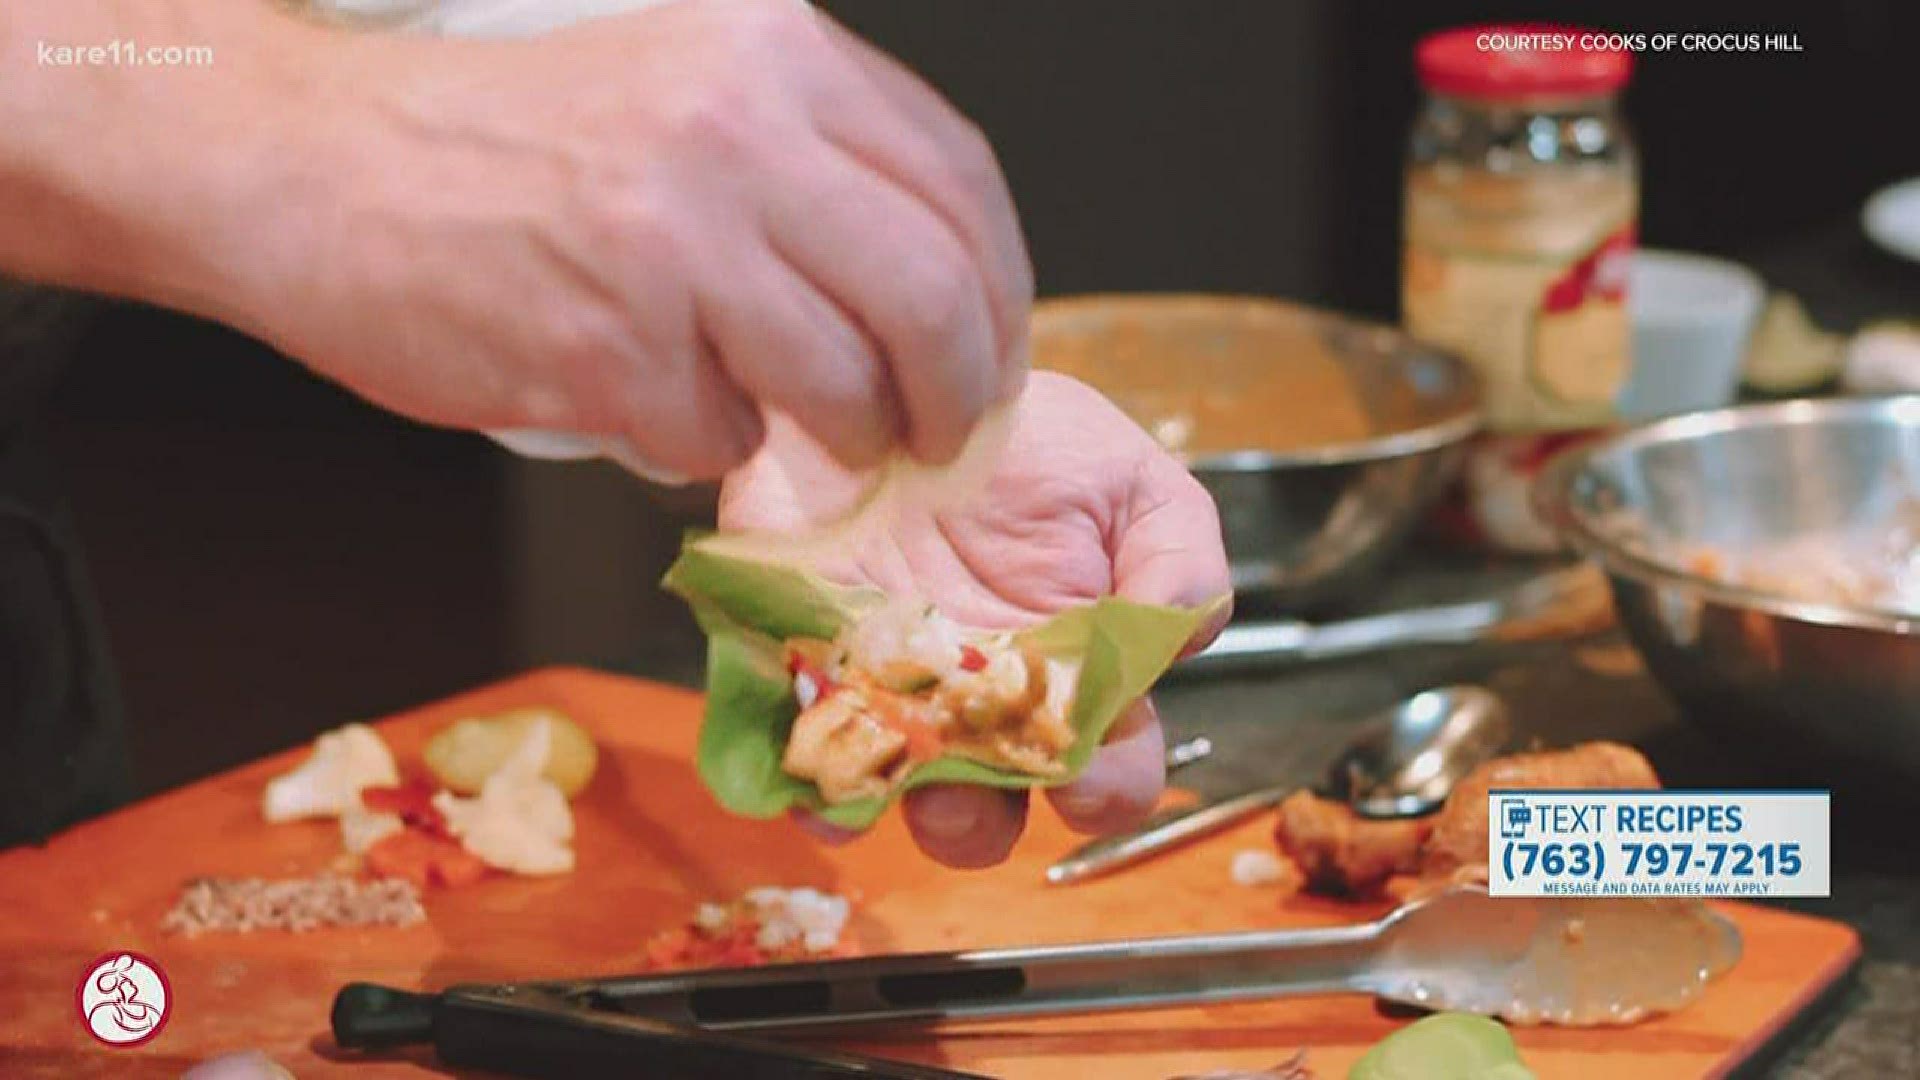 A recipe for hacked chicken lettuce cups from Cooks of Crocus Hill.